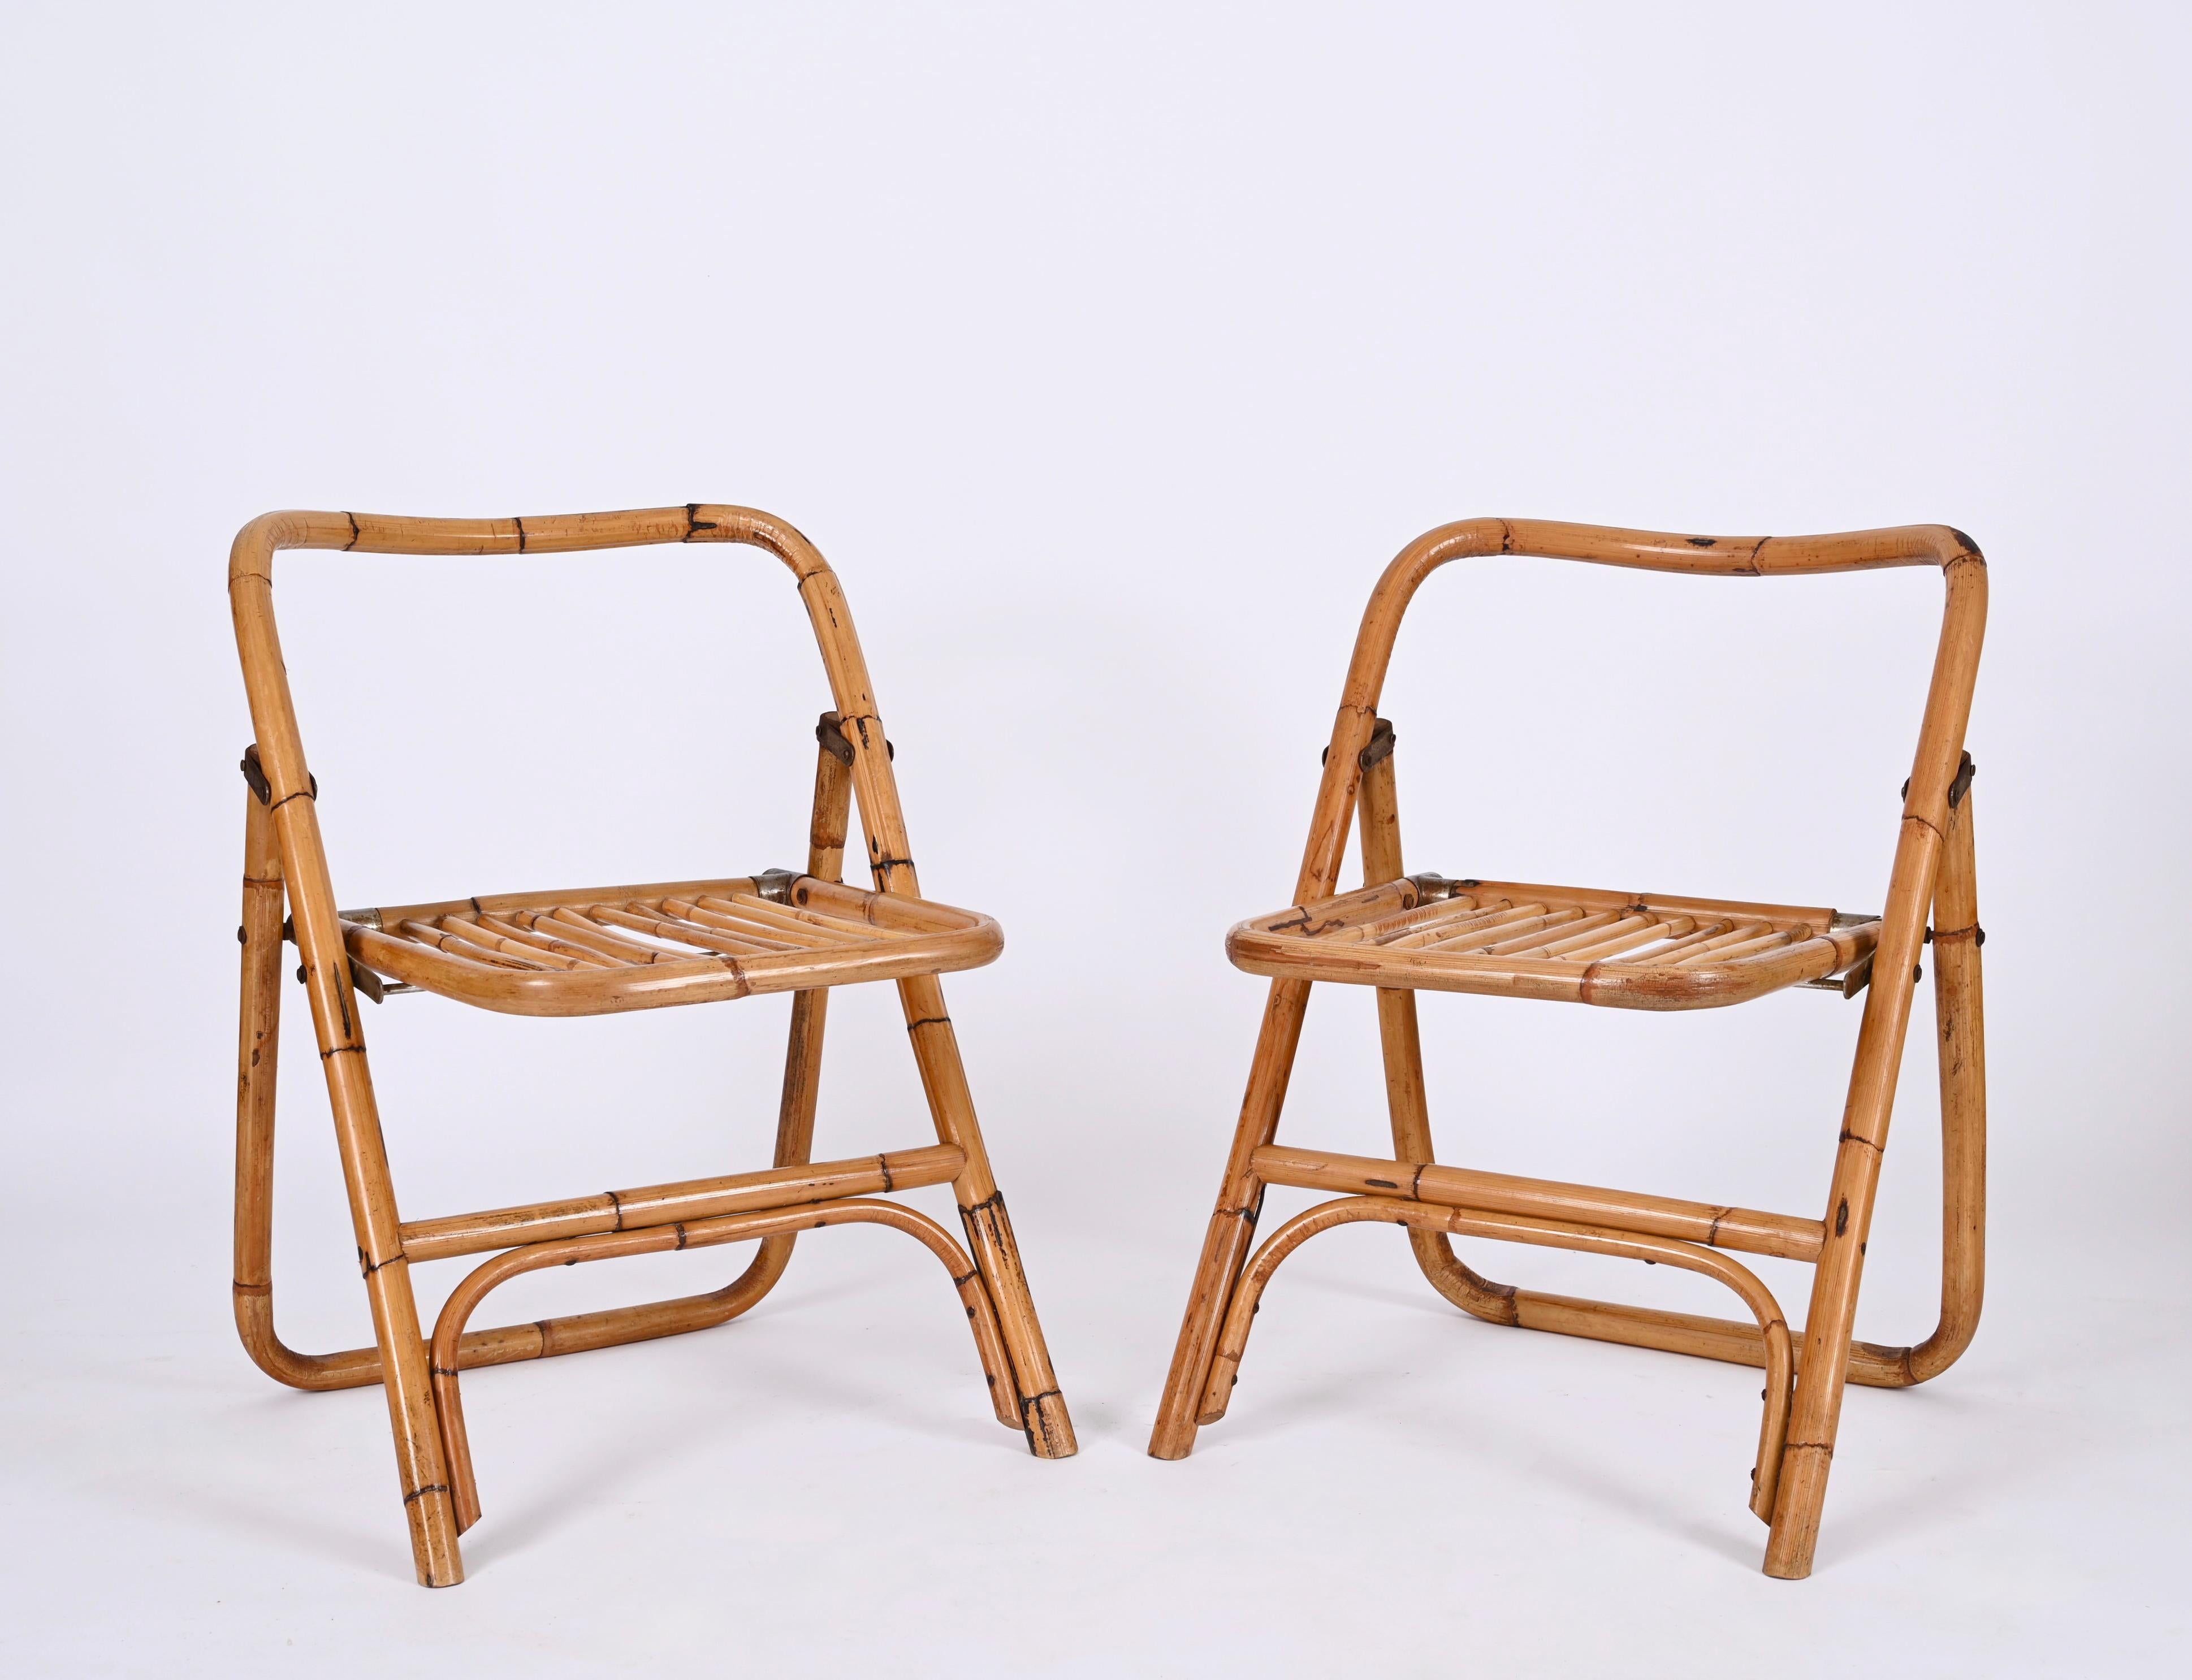 Dal Vera Bamboo Folding Chairs, Italy, 1960s For Sale 3